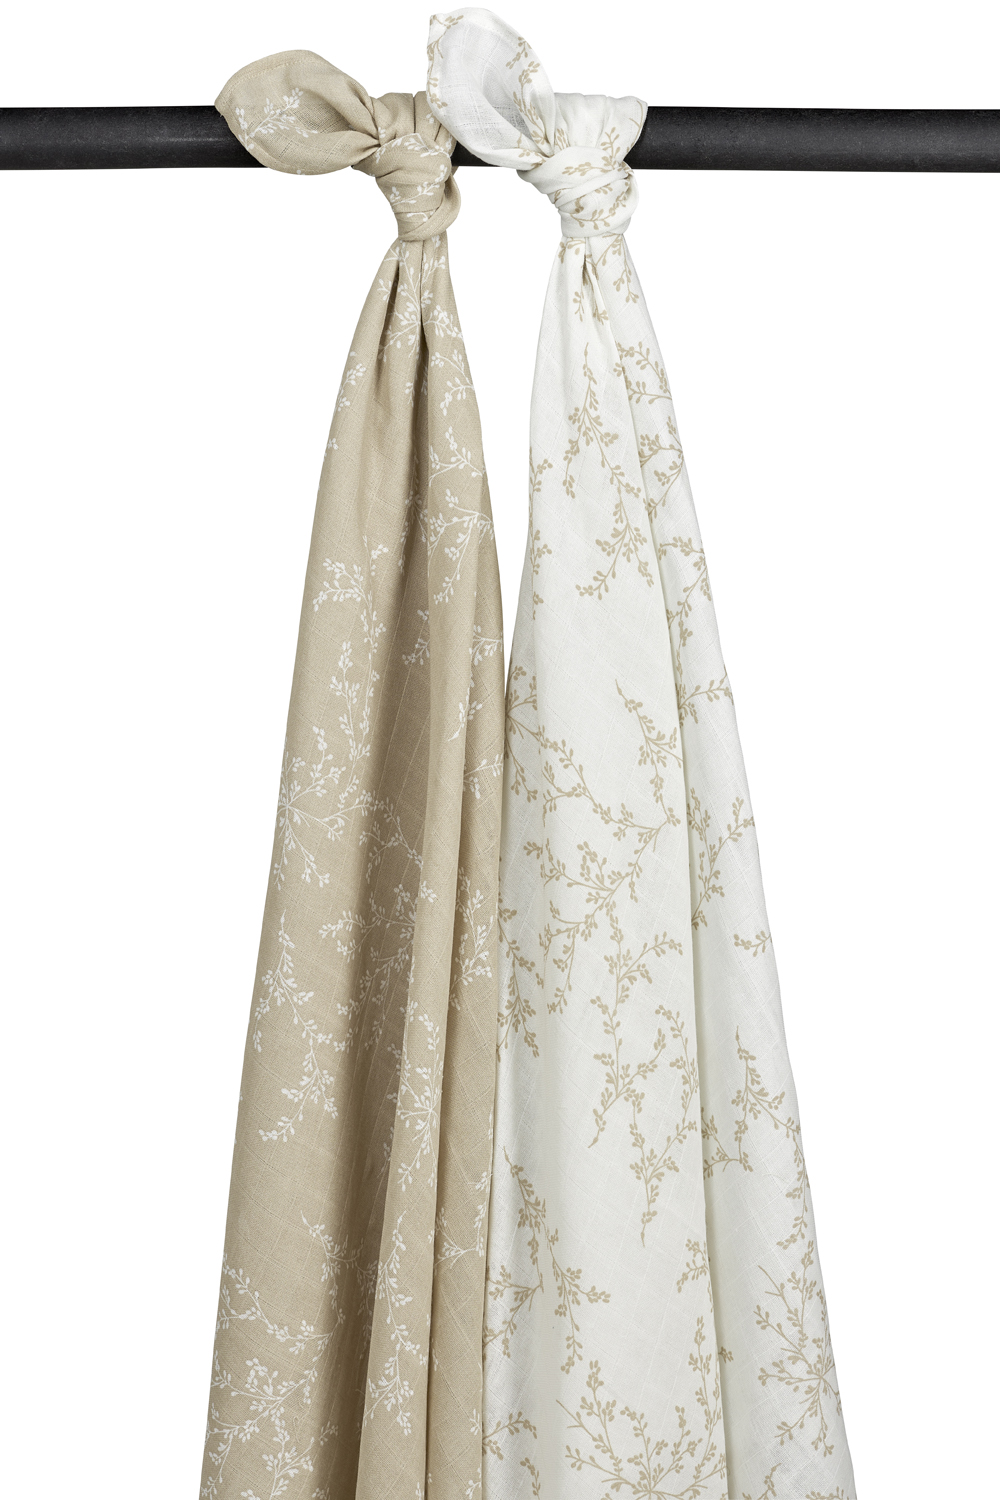 Muslin Swaddles 2-pack Branches - Sand - 120x120cm